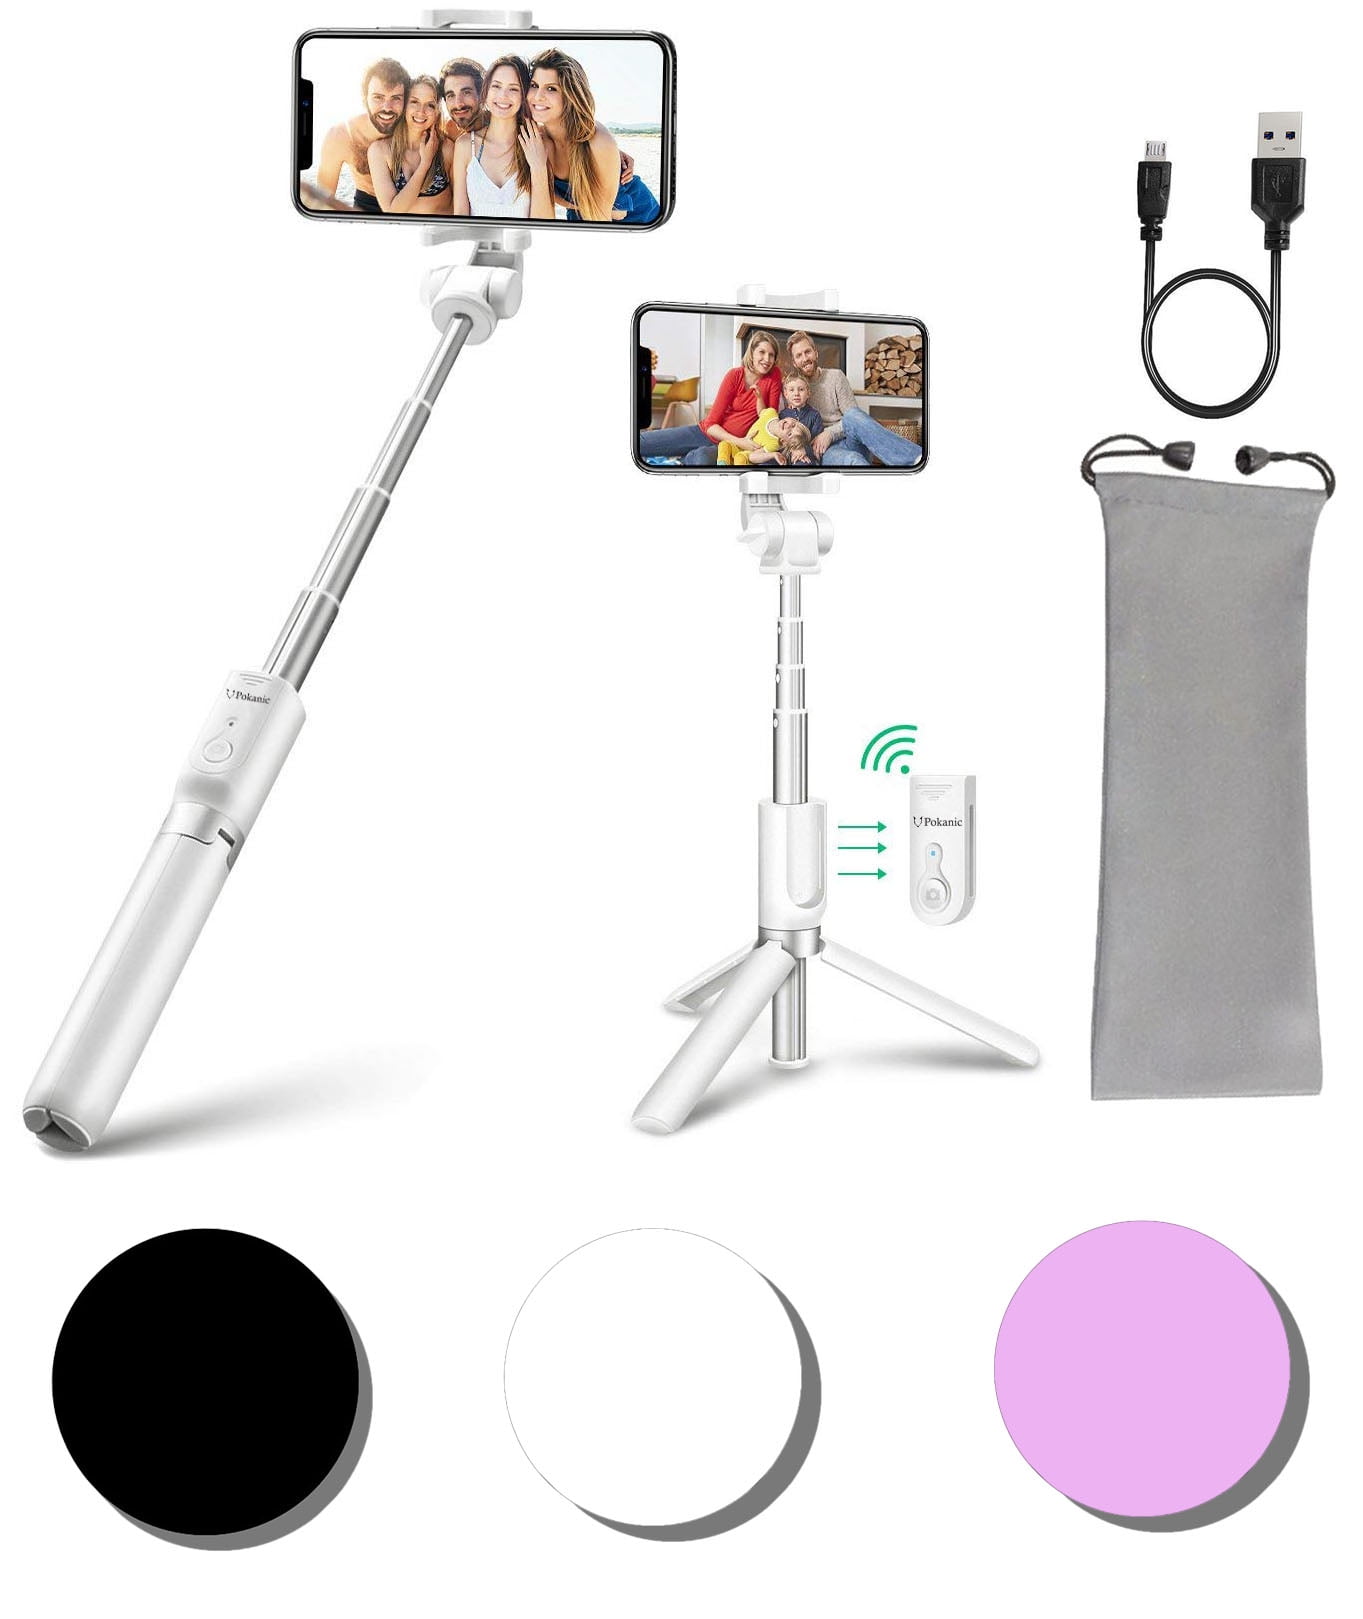 Galaxy S10 Plus/ S10/ S10e/ S9/ Black Selfie Stick Tripod POKANIC Bluetooth Wireless Remote Control Extendable Adjustable Stand Mount Compatible with iPhone XS Max/ XS/ XR/ X/ 8/ 8 Plus/ 7/ 7 Plus 